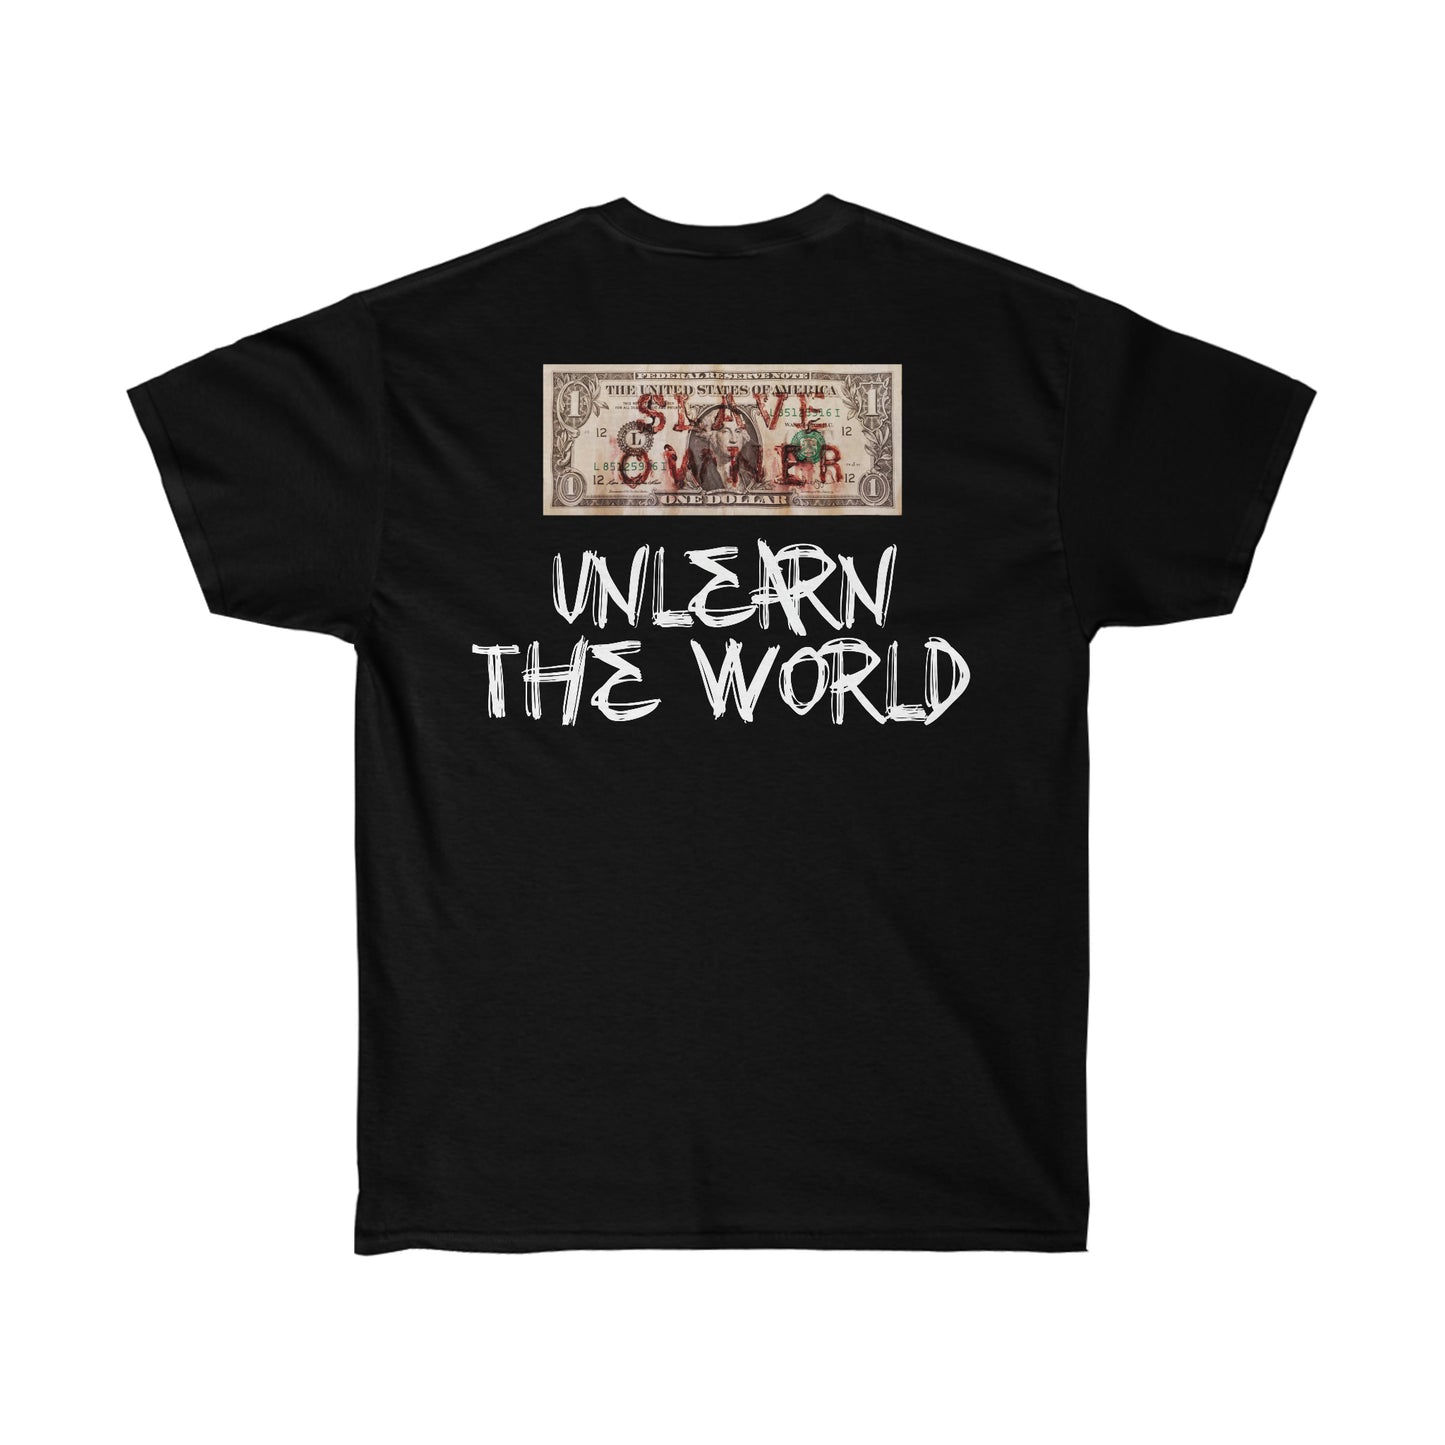 Unlearn The World - Slave Owners Tee